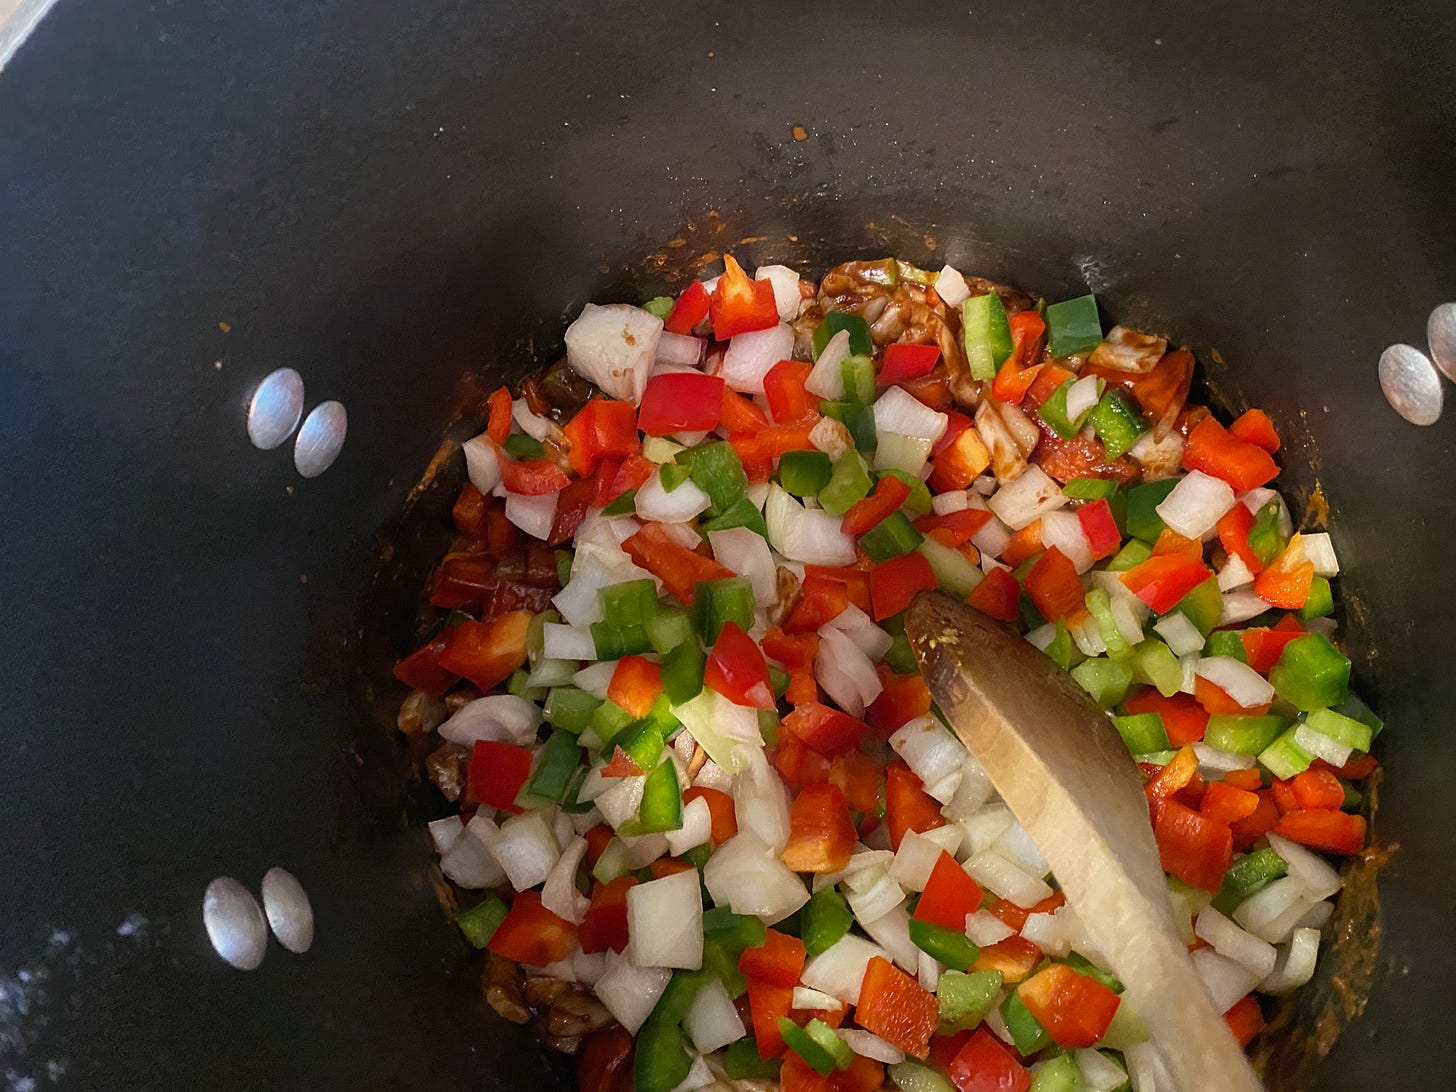 onions, celery, peppers in a bowl